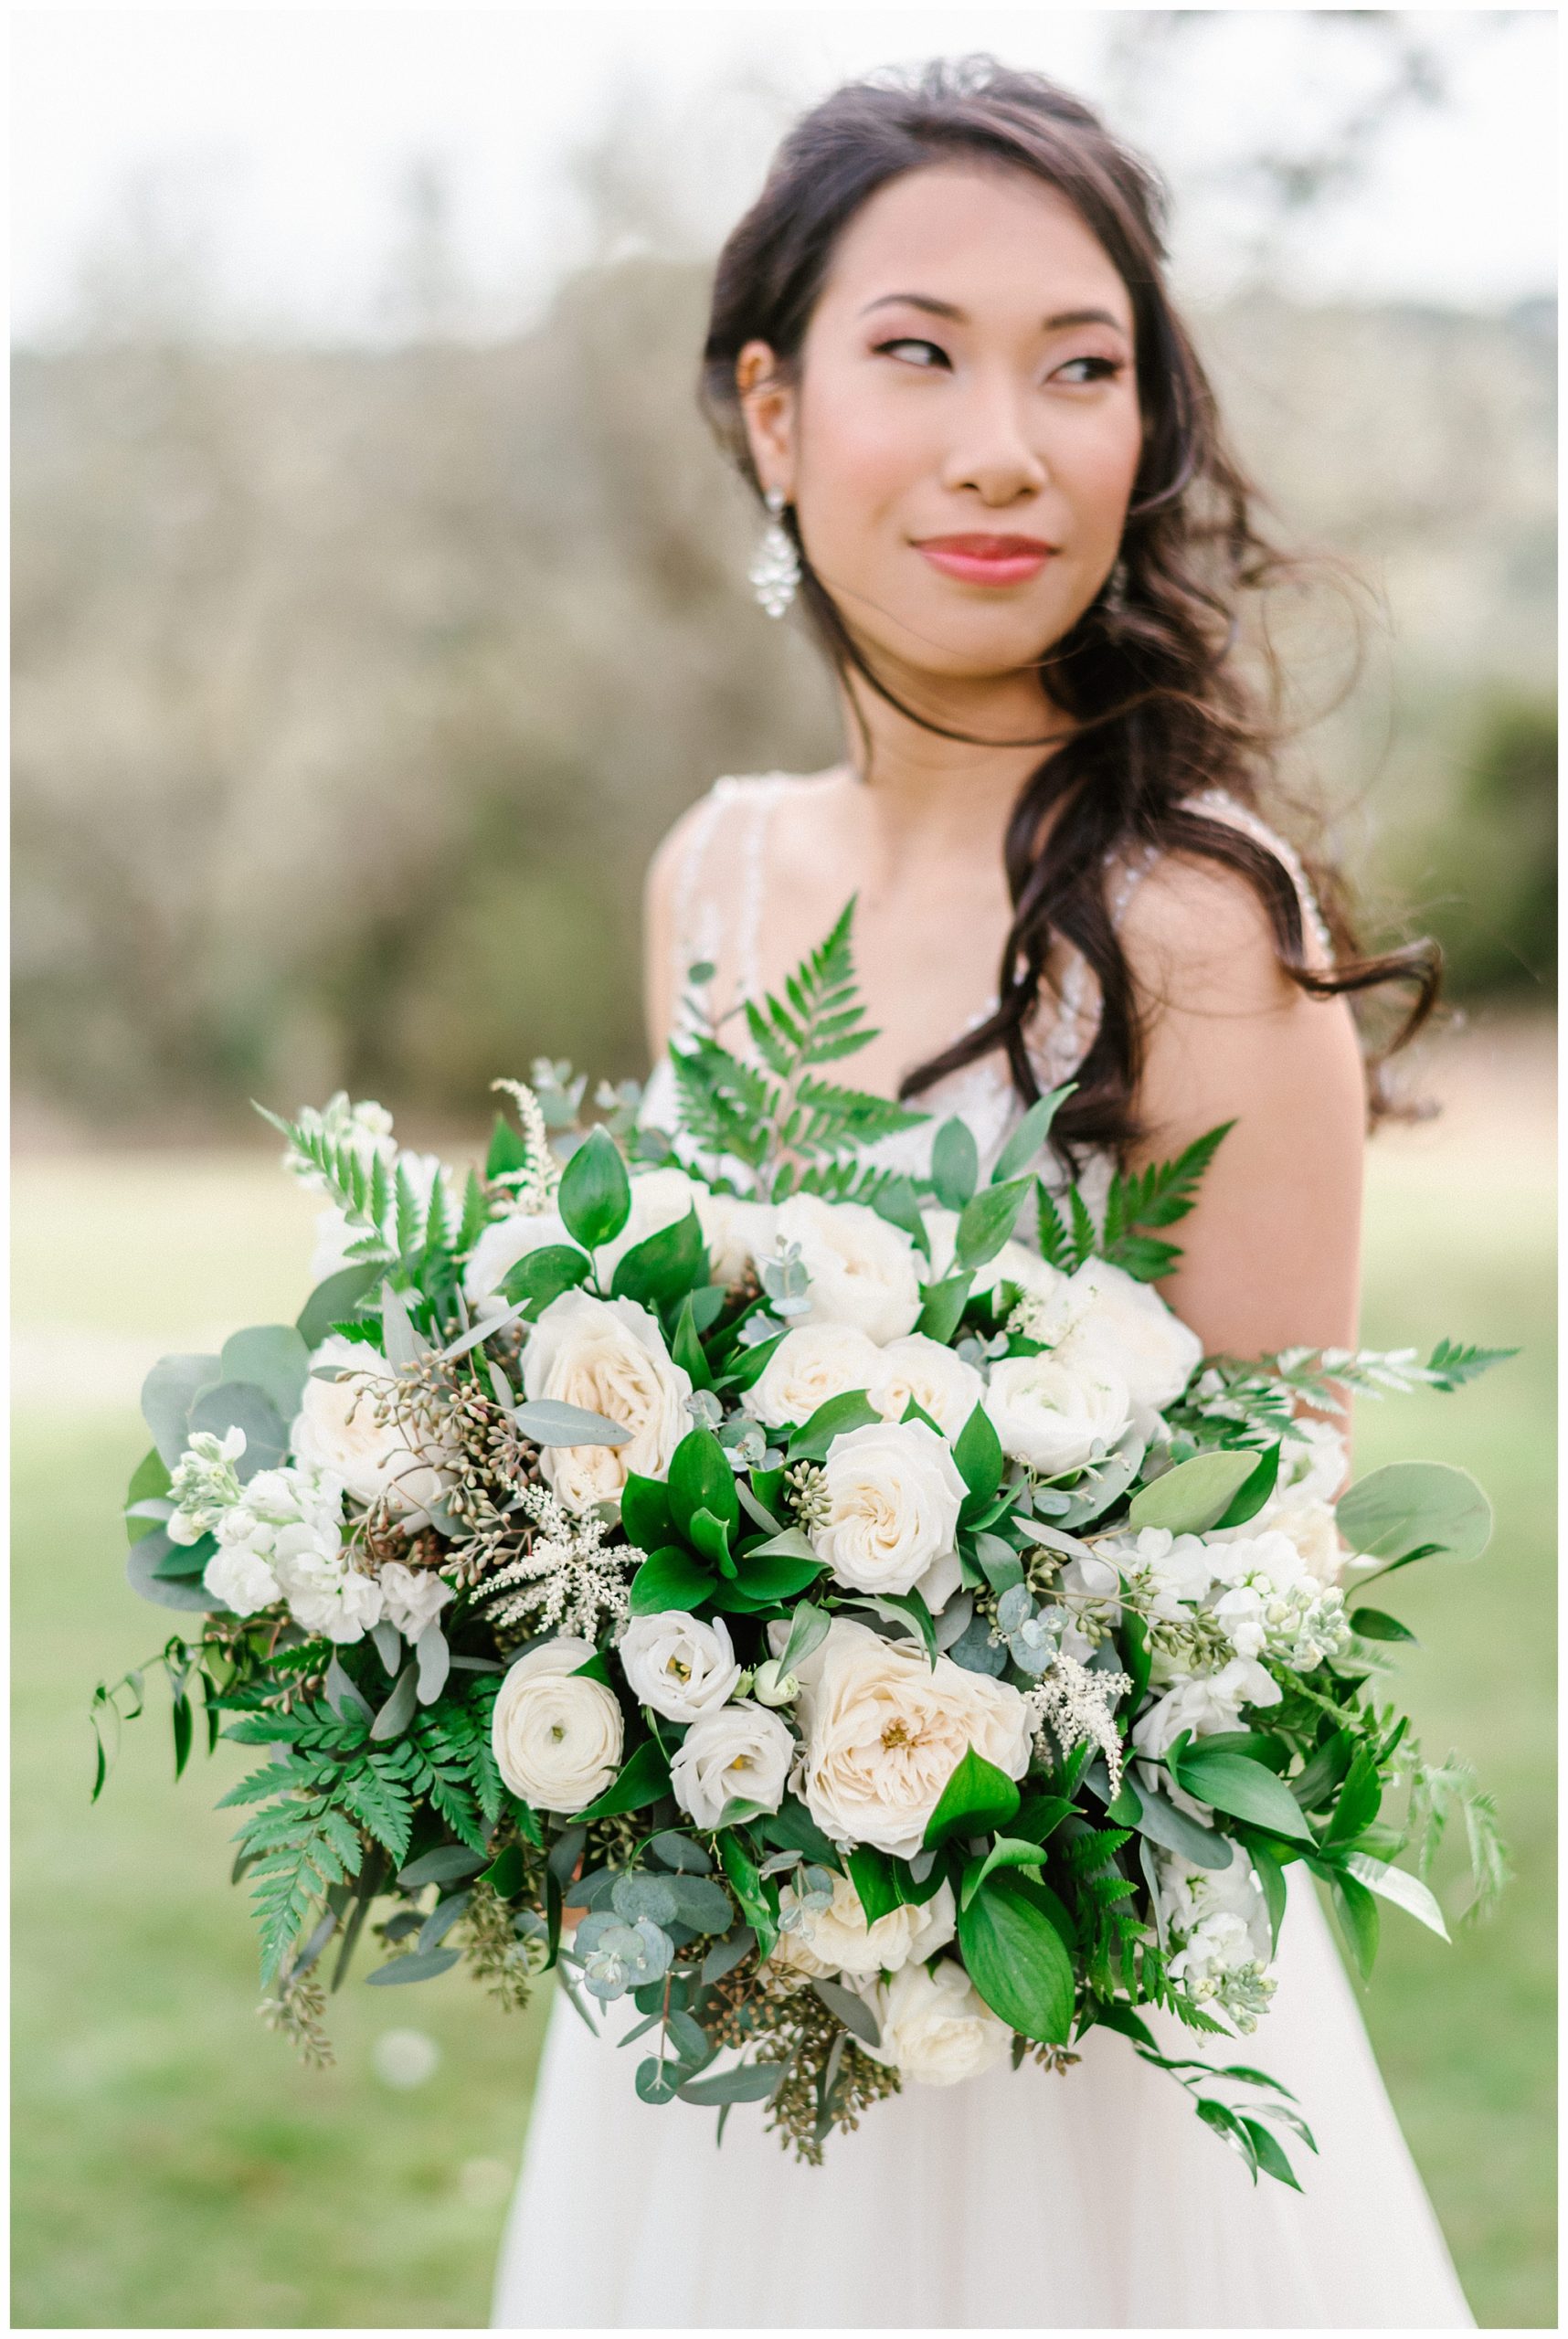 Gorgeous Bride holding her Classic White Bouquet